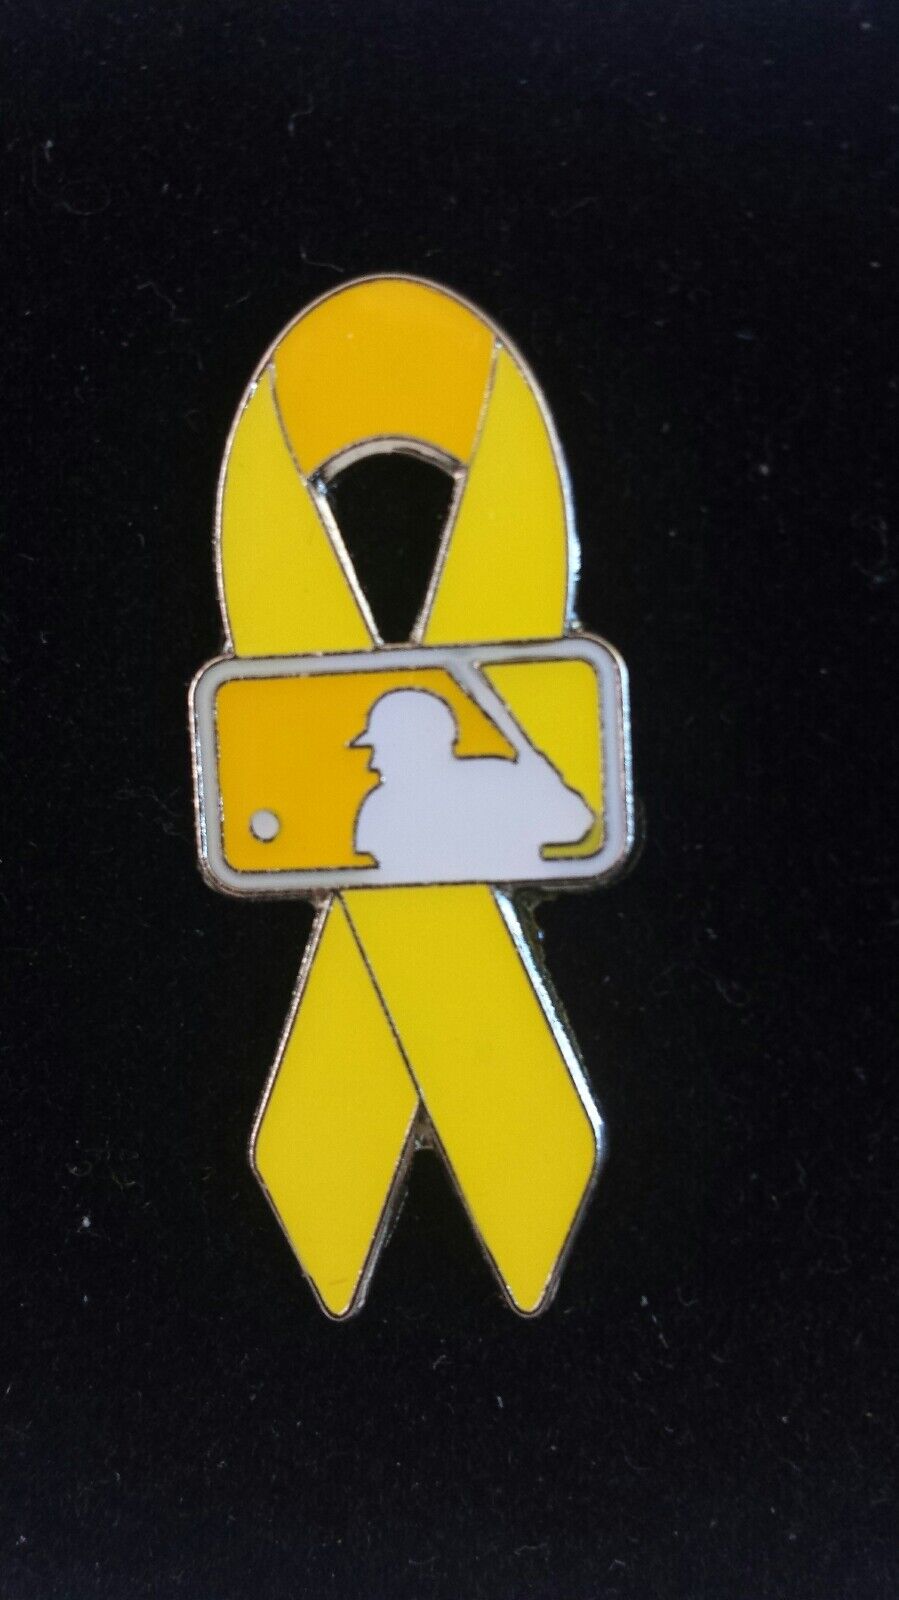  MLB-YELLOW RIBBON CHILDHOOD CANCER AWARENESS/SUPPORT OUR TROOPS PIN FREE SHPG